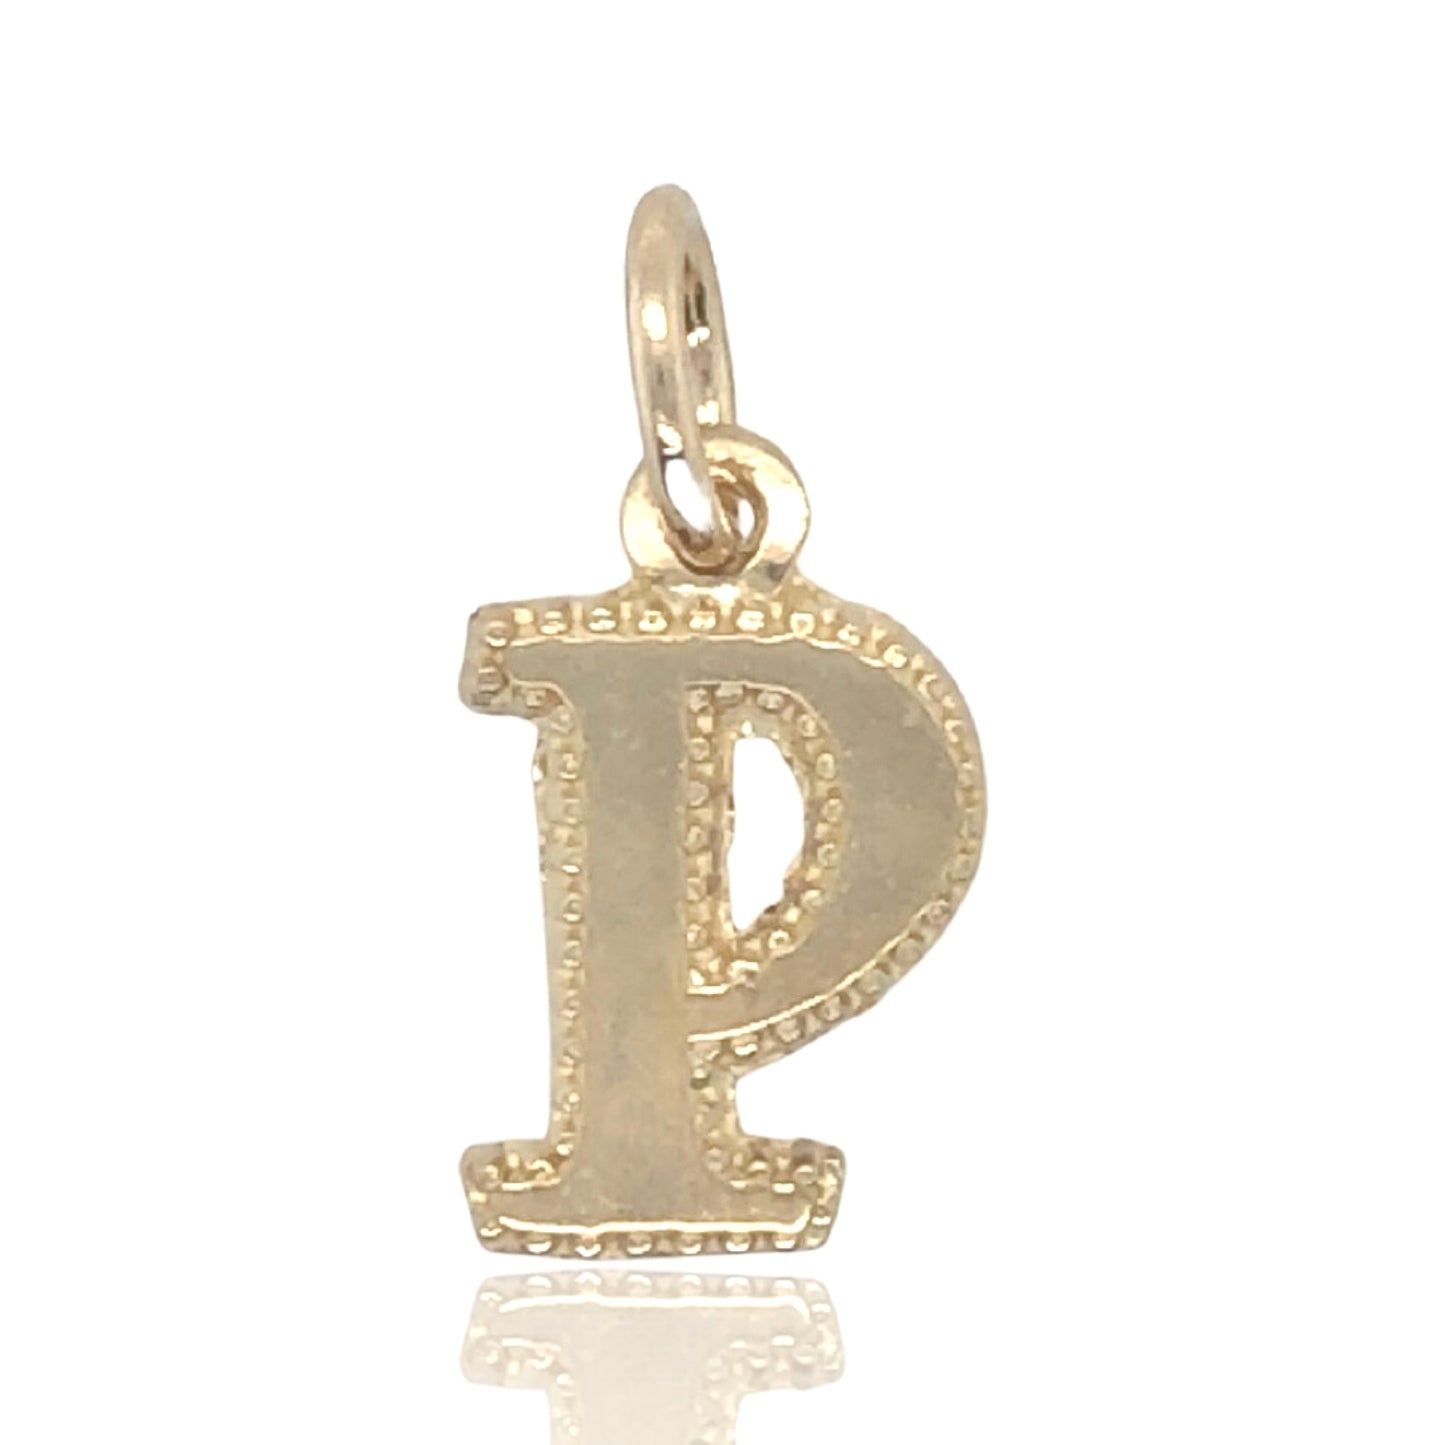 10K Yellow Gold Initial Charm Letter "P"